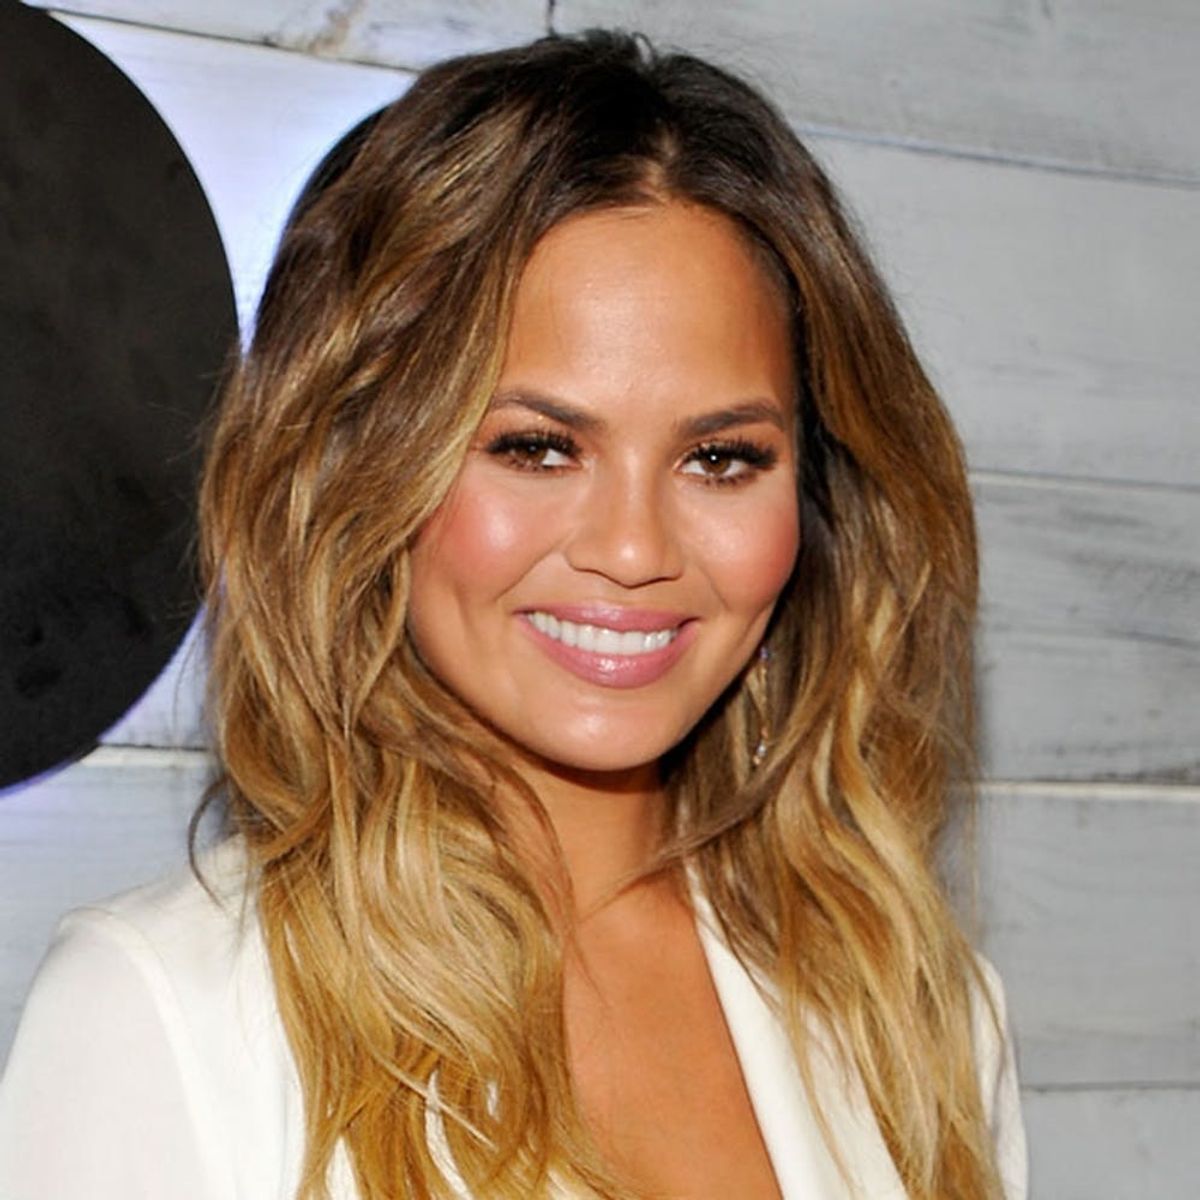 Chrissy Teigen Just Gave Us Our First Recipe for Thanksgiving